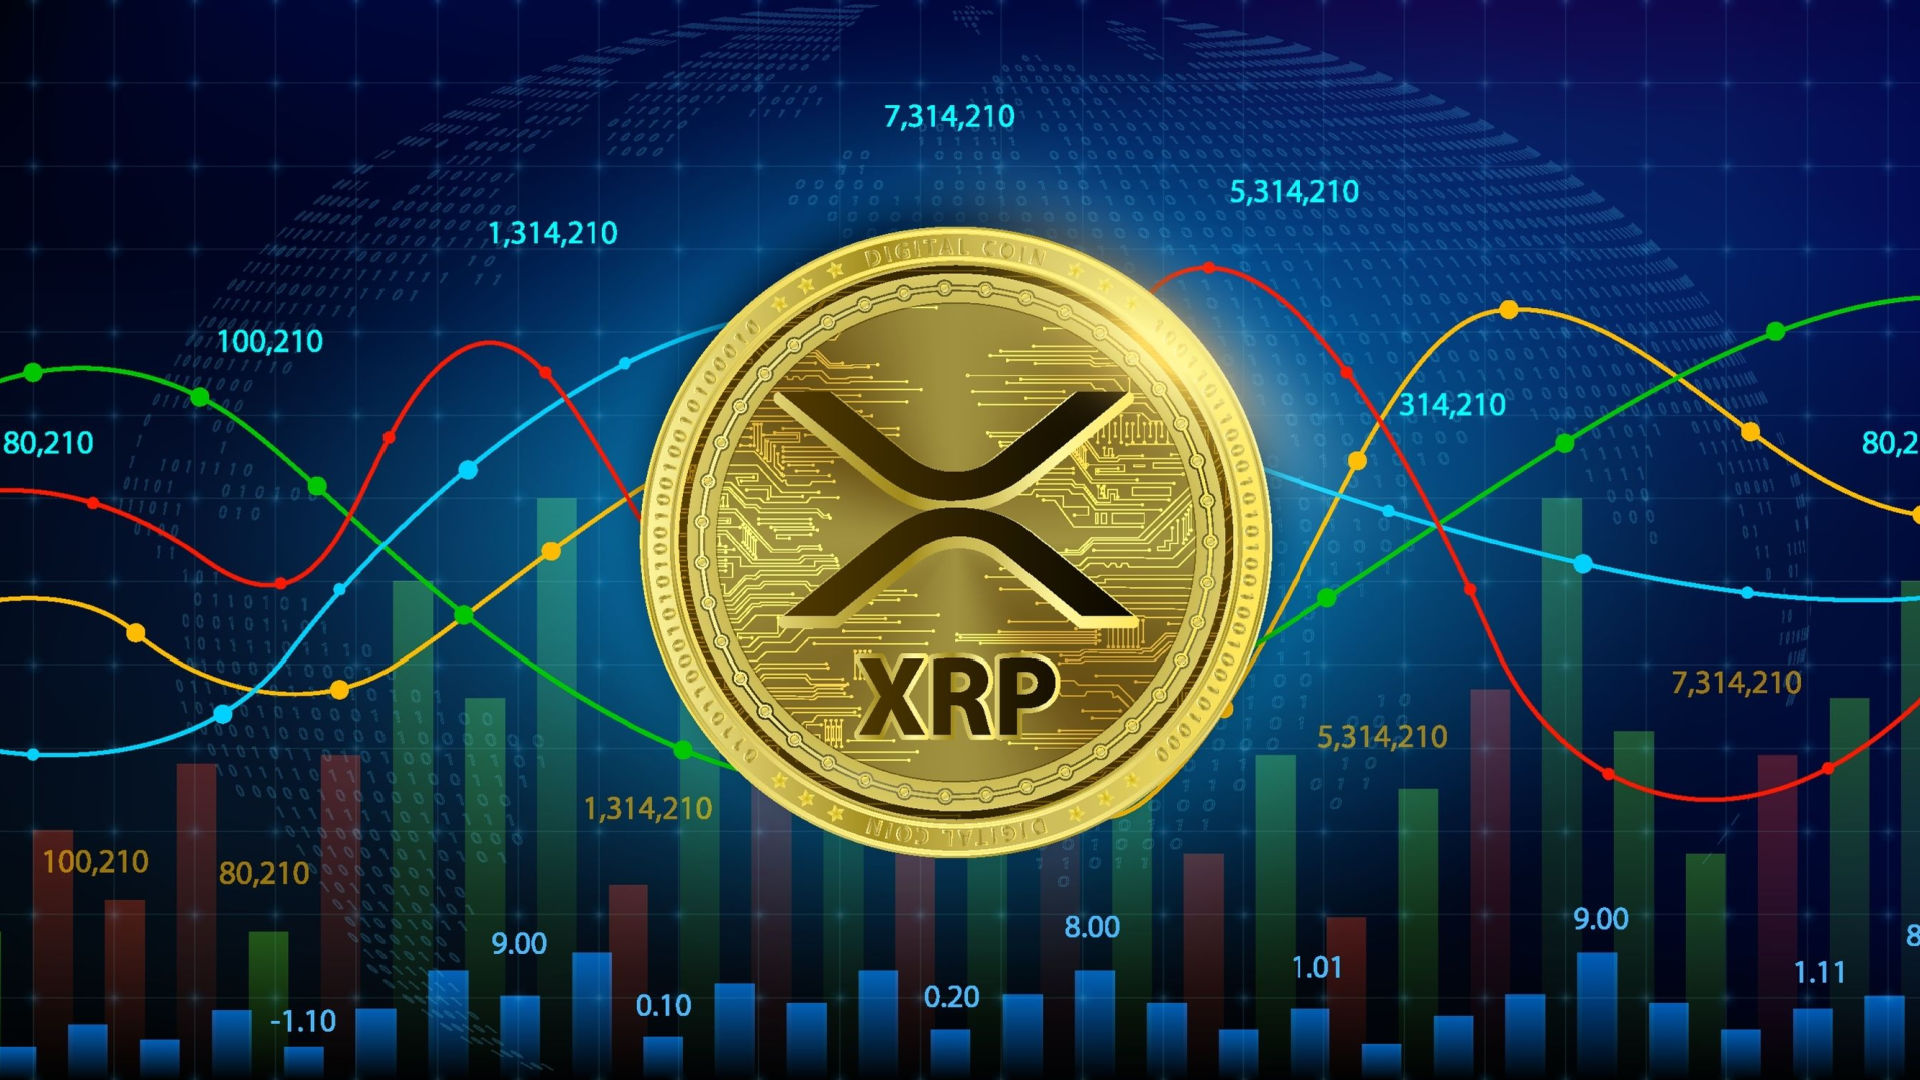 John Deaton Sees Ripple’s XRP As The Most Resilient Crypto Coin